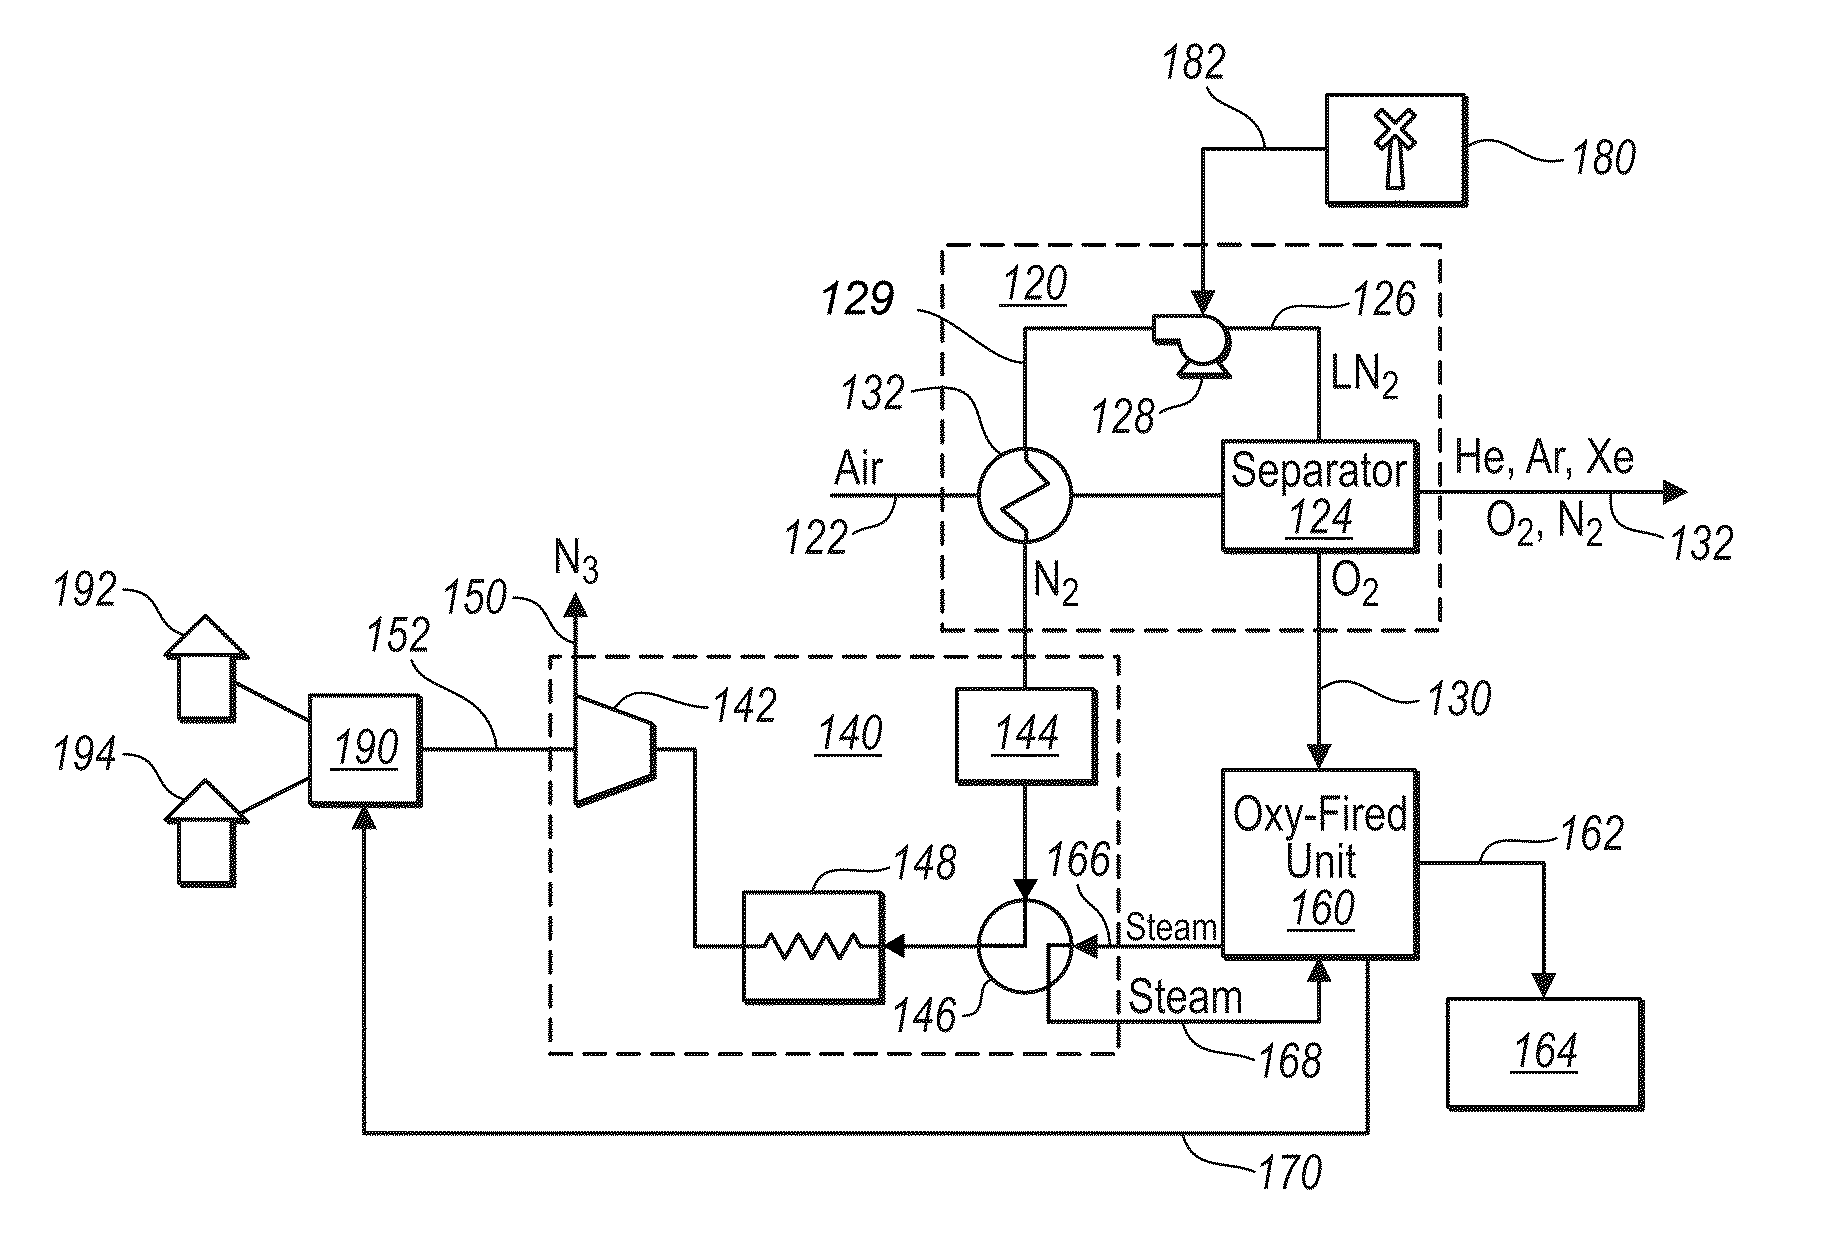 Methods and systems for generating power from a turbine using pressurized nitrogen